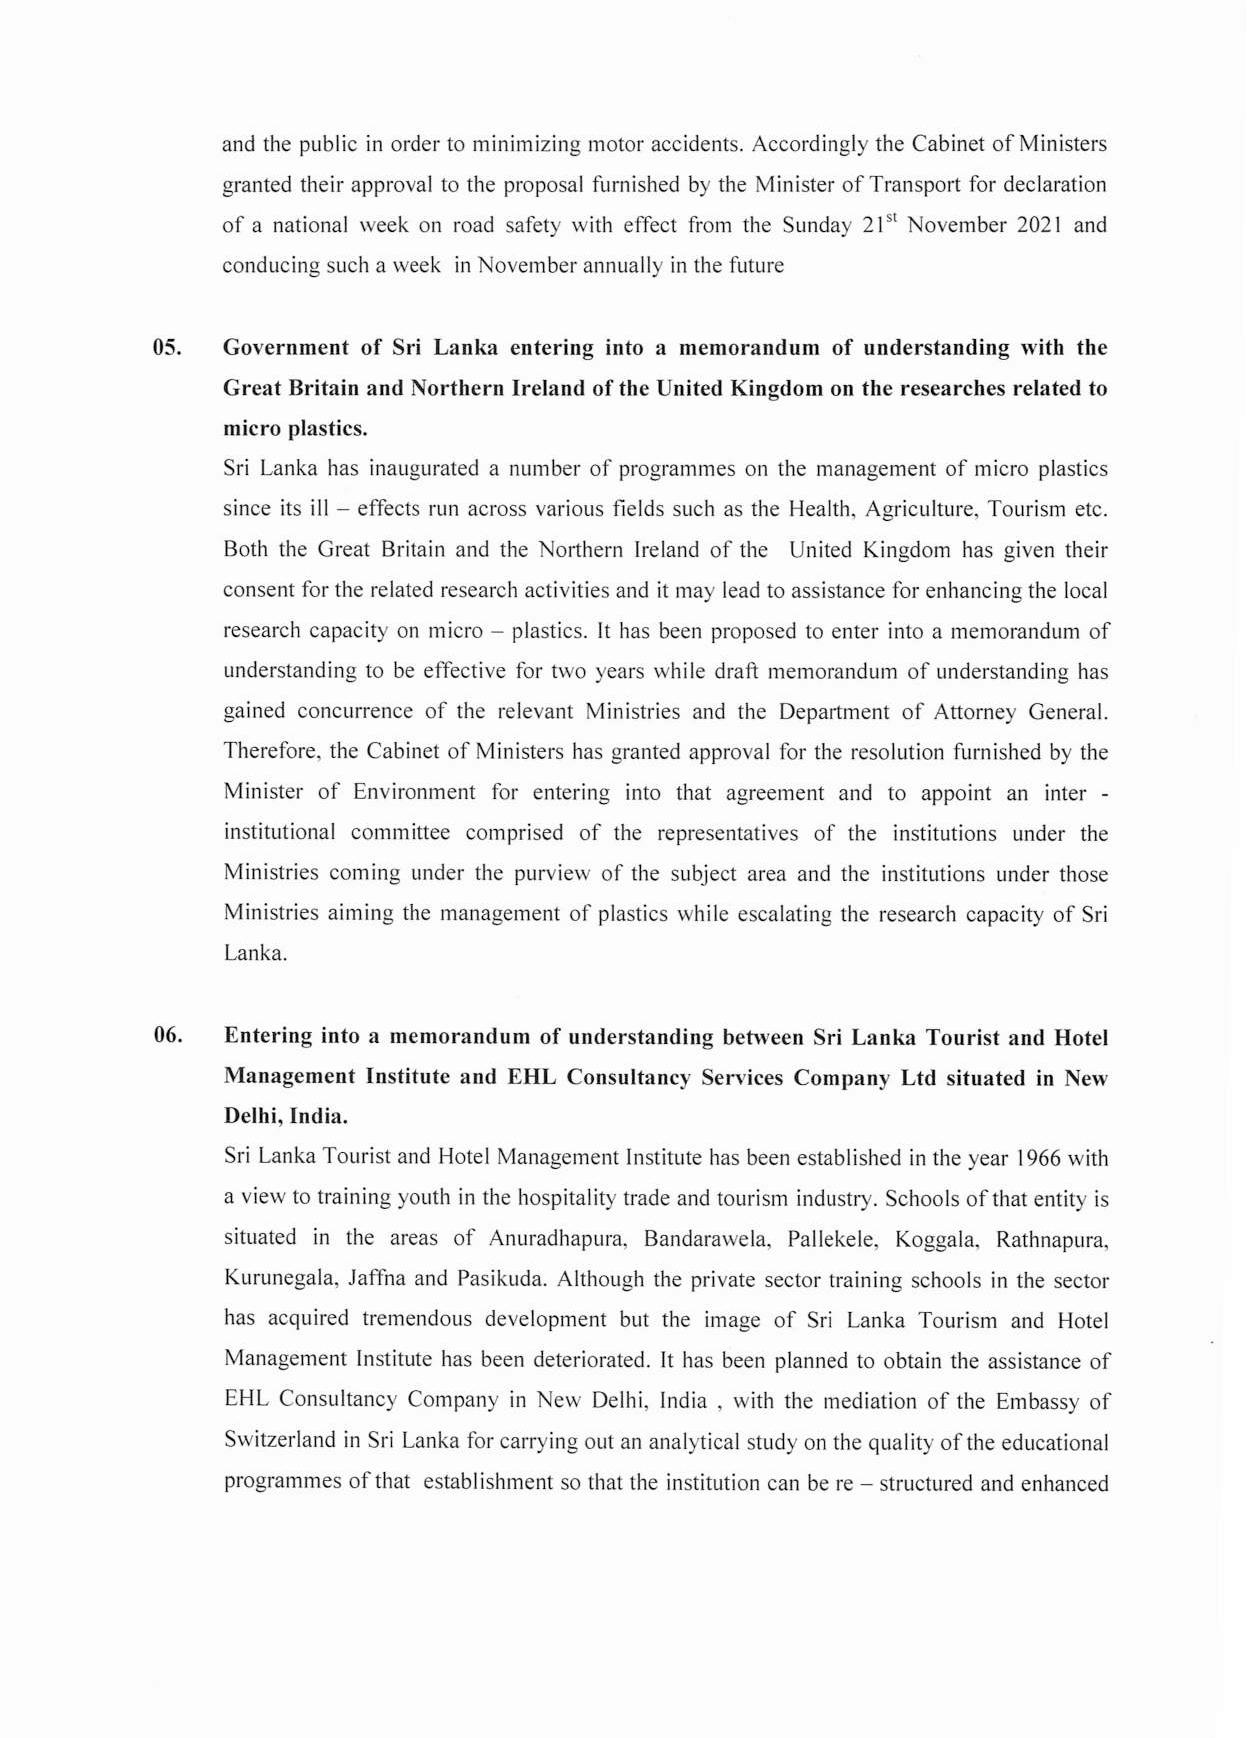 Cabinet Decision on 03.05.2021 English page 003